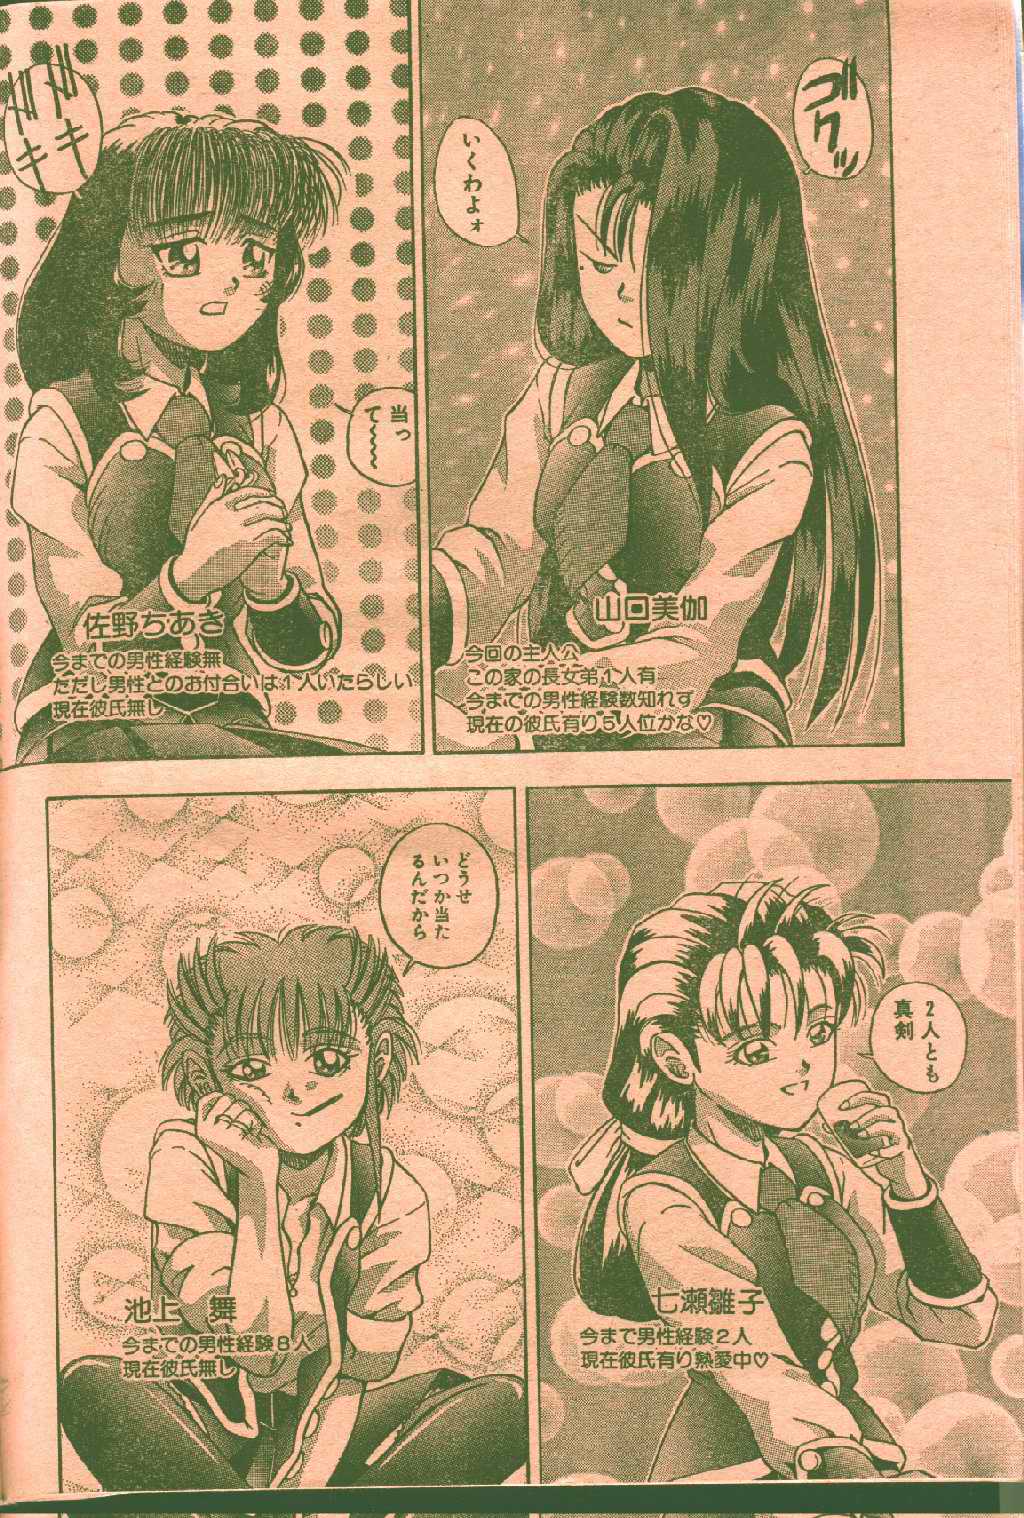 Cotton Comic 1996-02 [Incomplete] page 18 full